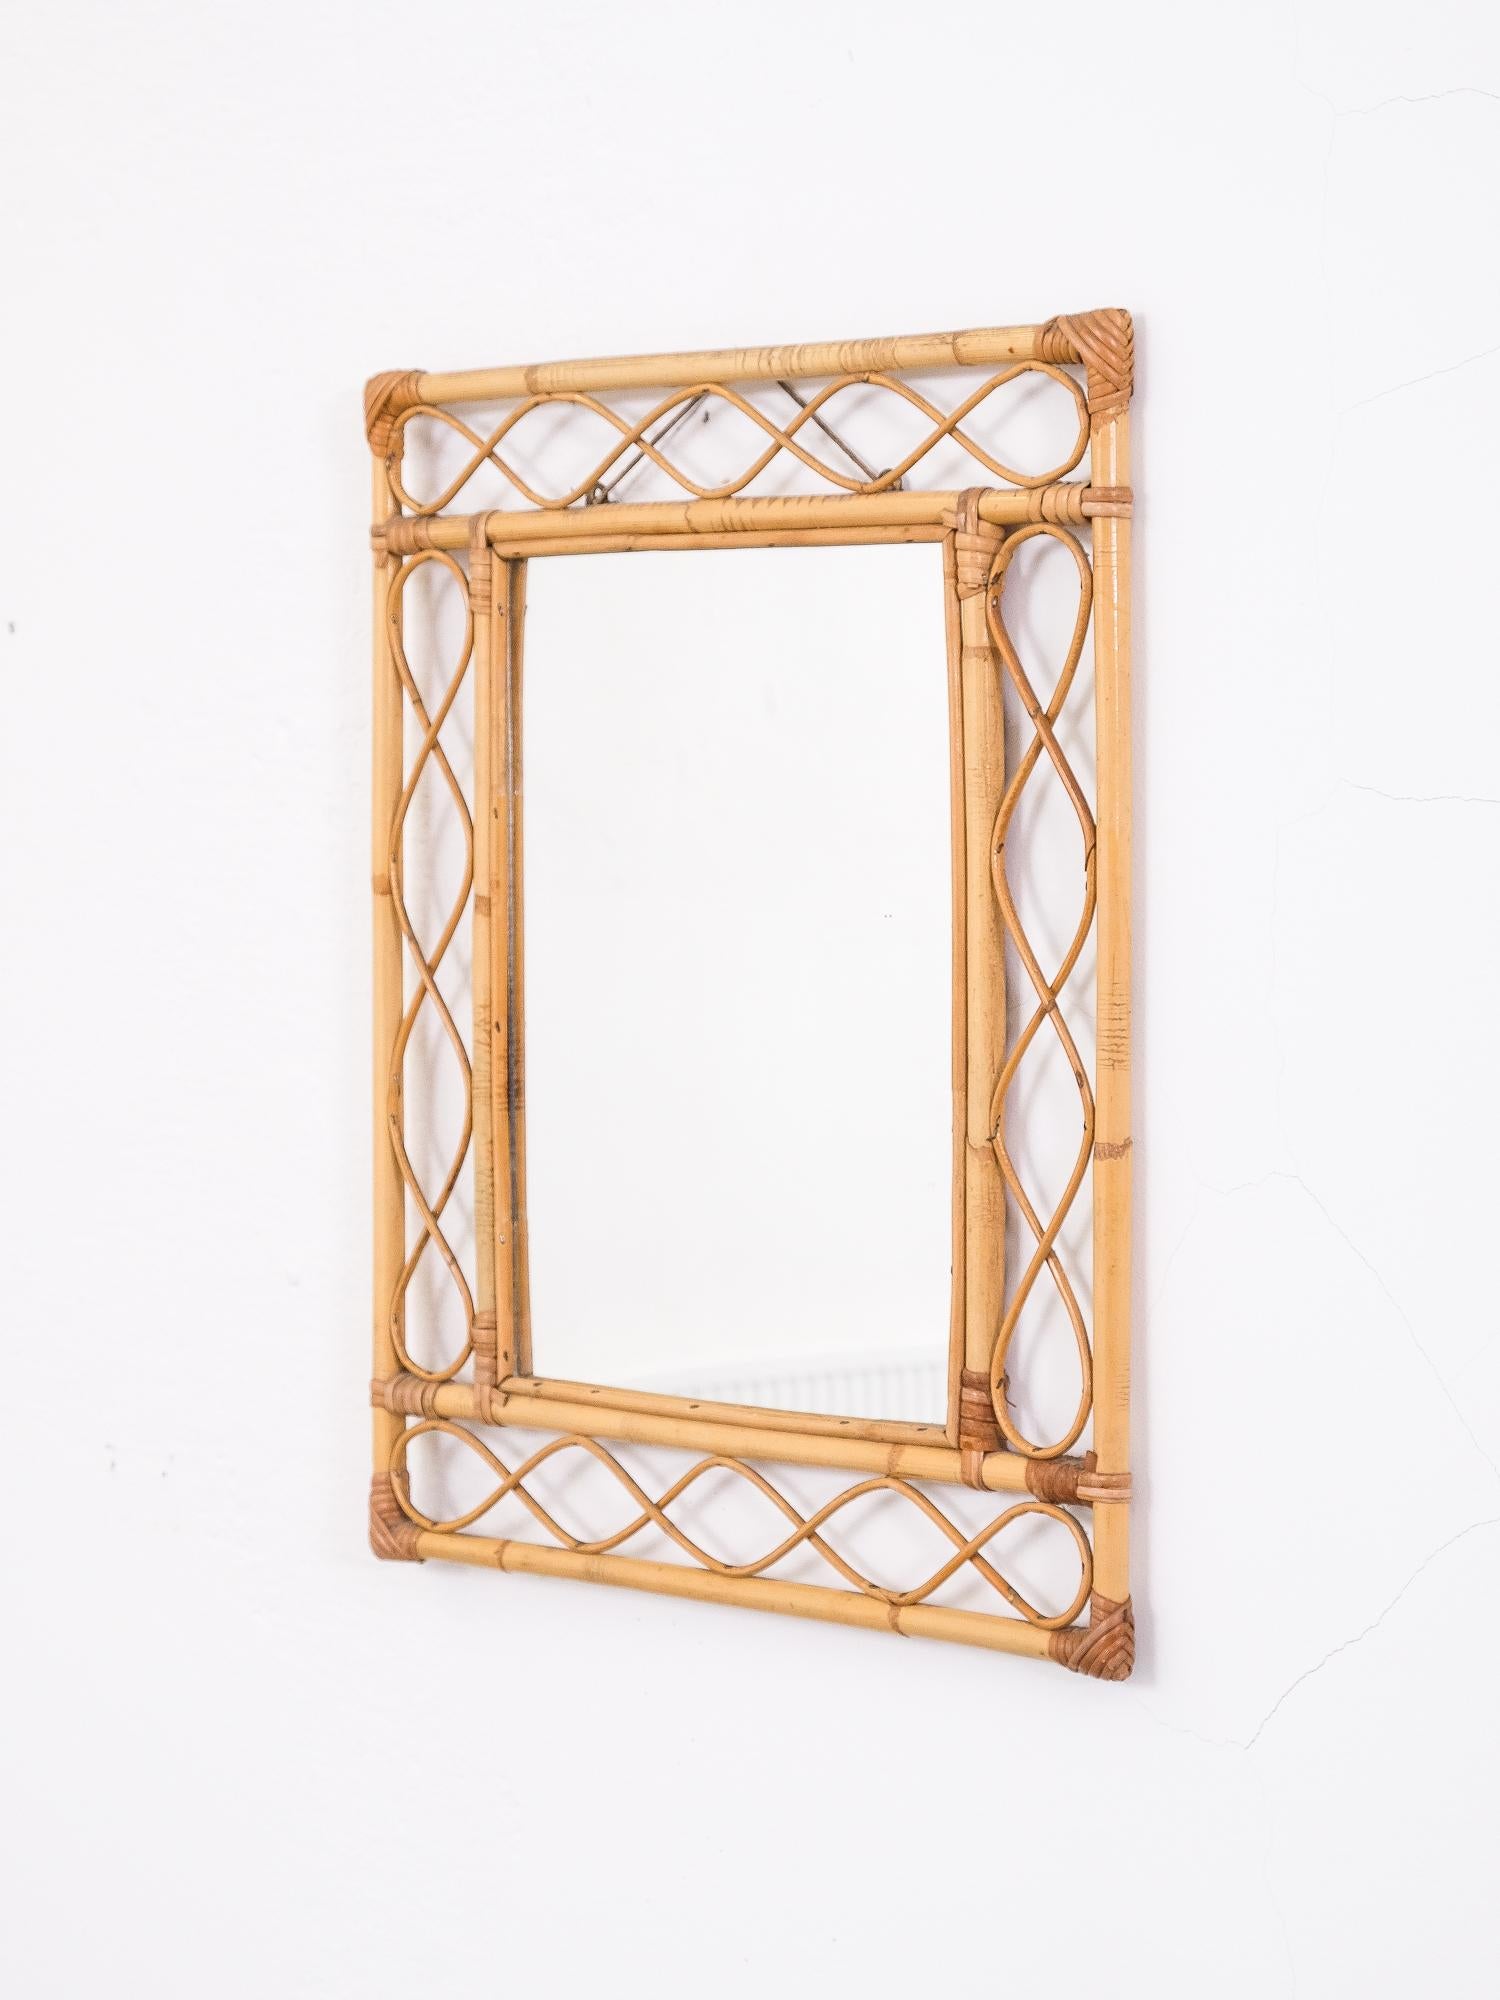 Scandinavian midcentury wall mirror manufactured in rattan and bamboo, in very nice original vintage condition.